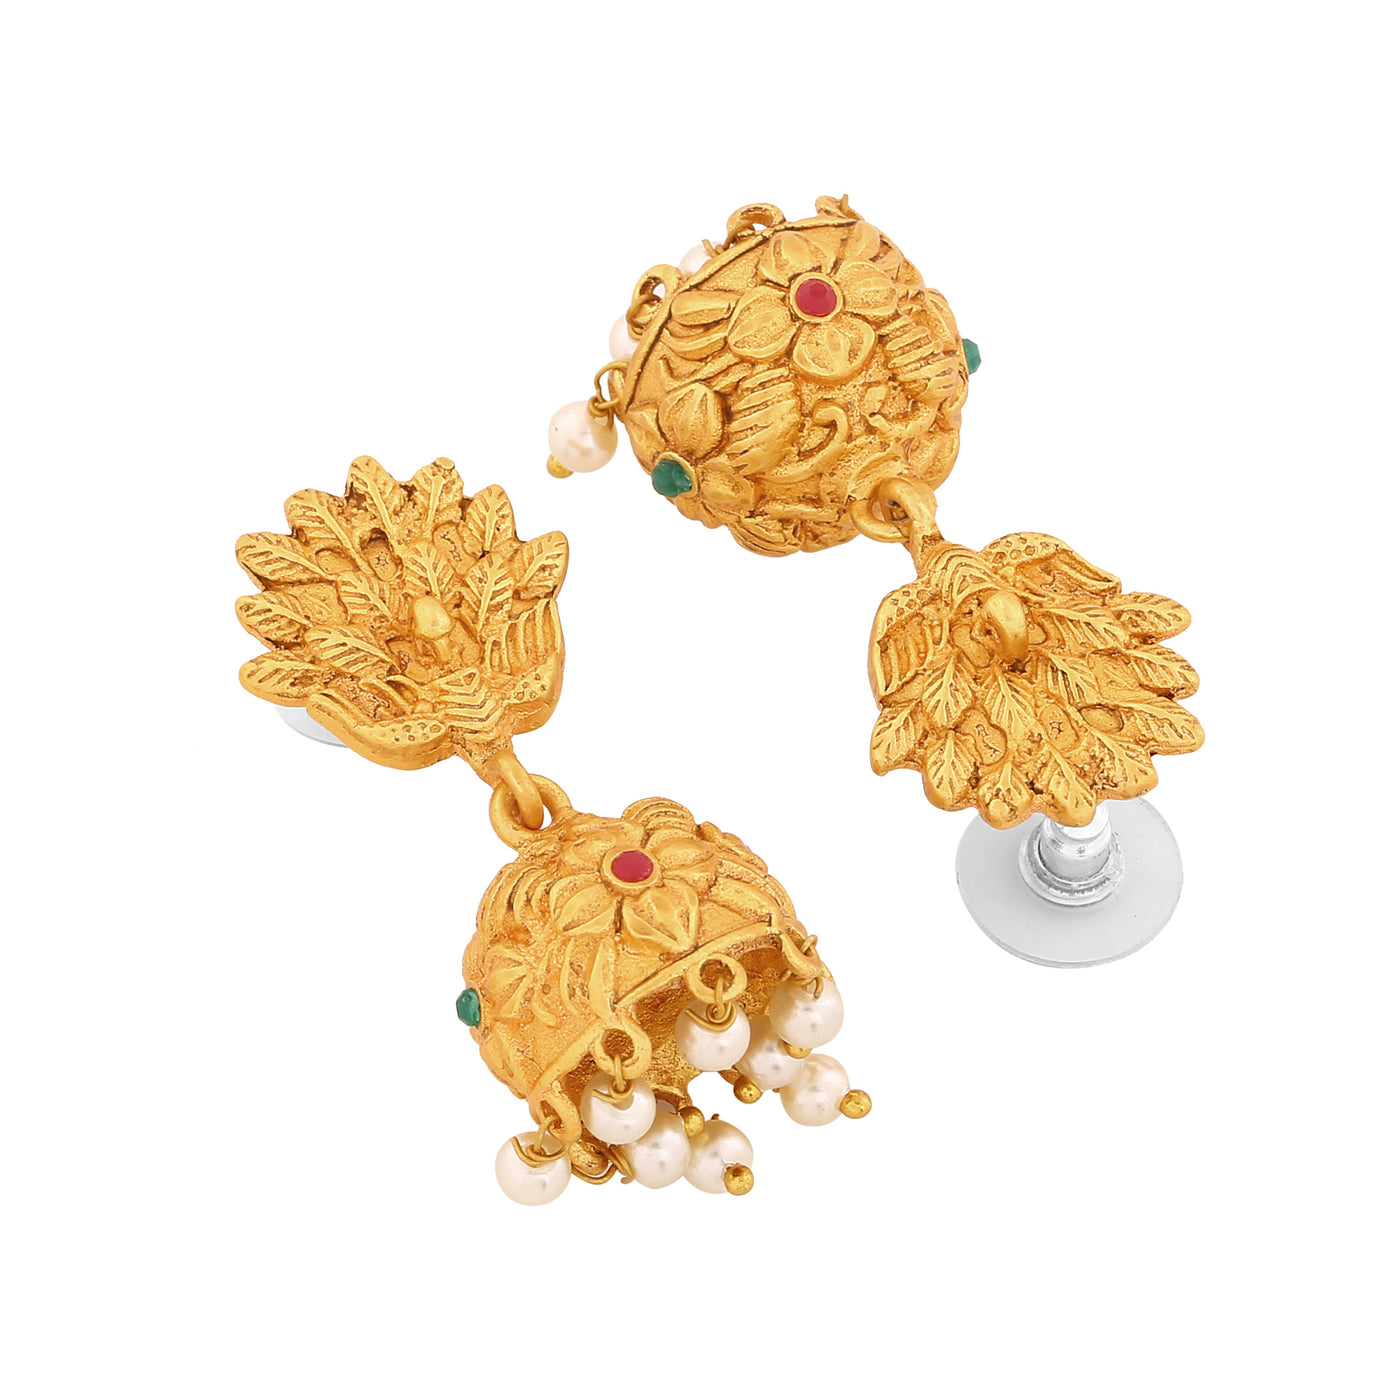 Estele gold Plated Elegant Peacock Designer Jhumki Earrings with Crystals & Pearls for Women